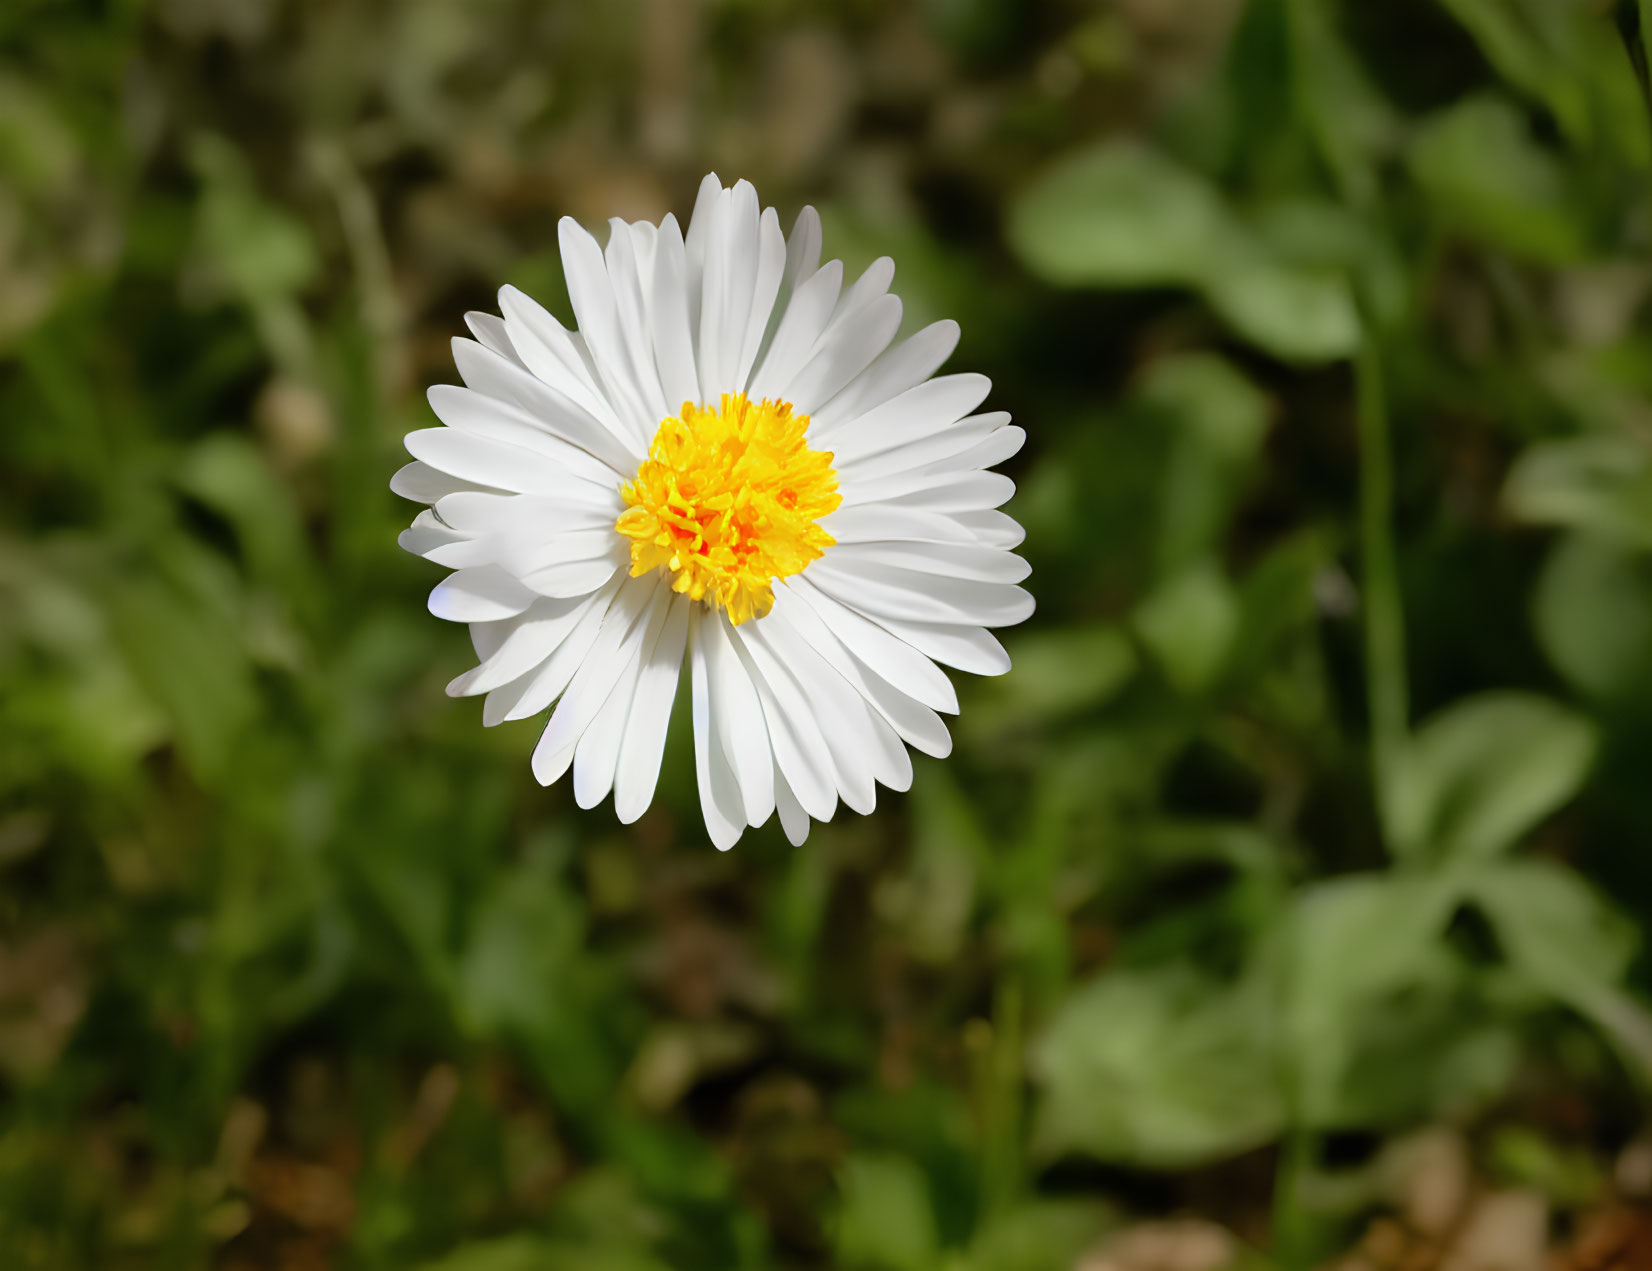 Single White Daisy with Bright Yellow Center on Blurry Green Background